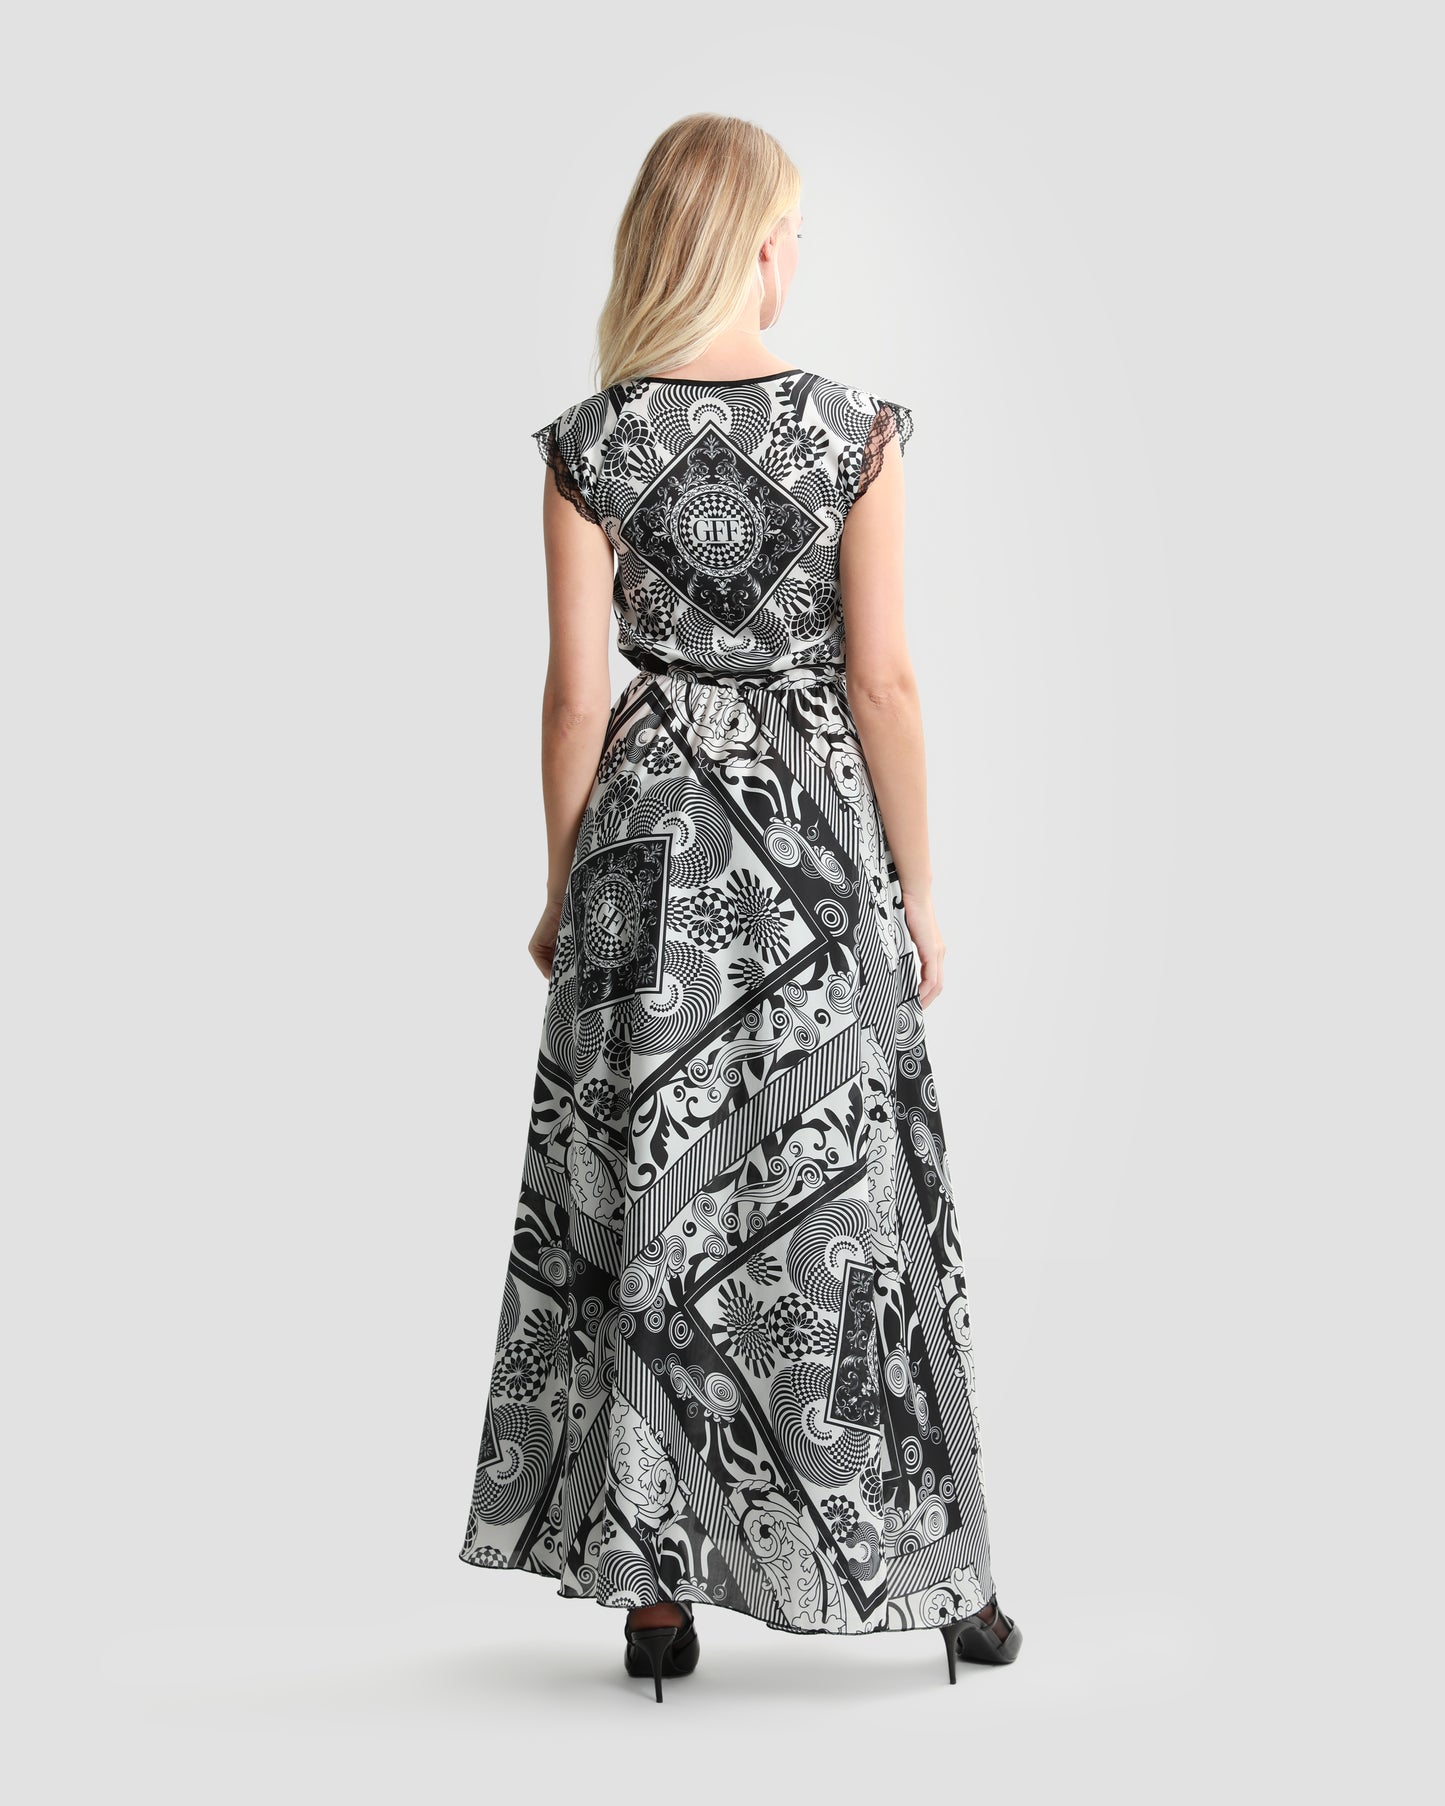 Lace Trimmed Graphic Printed Dress